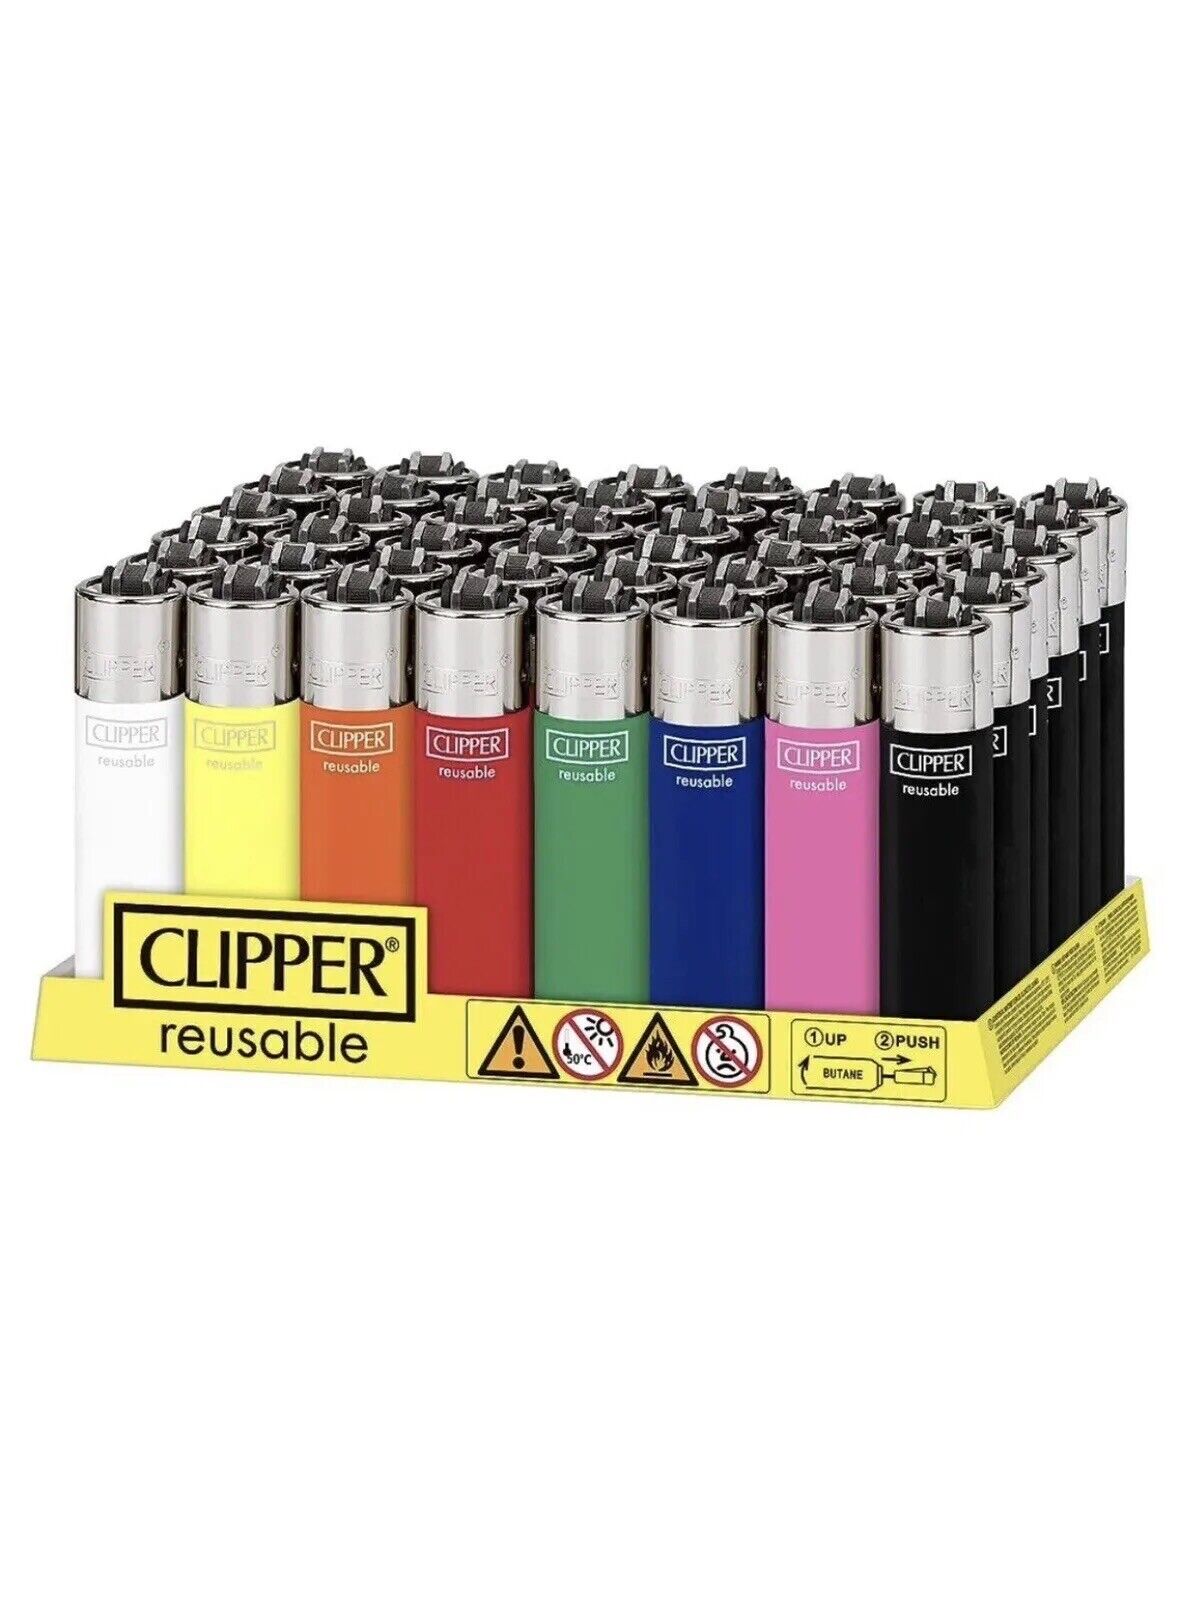 8 X Clipper Reusable Lighters Assorted Solid Color Refillable